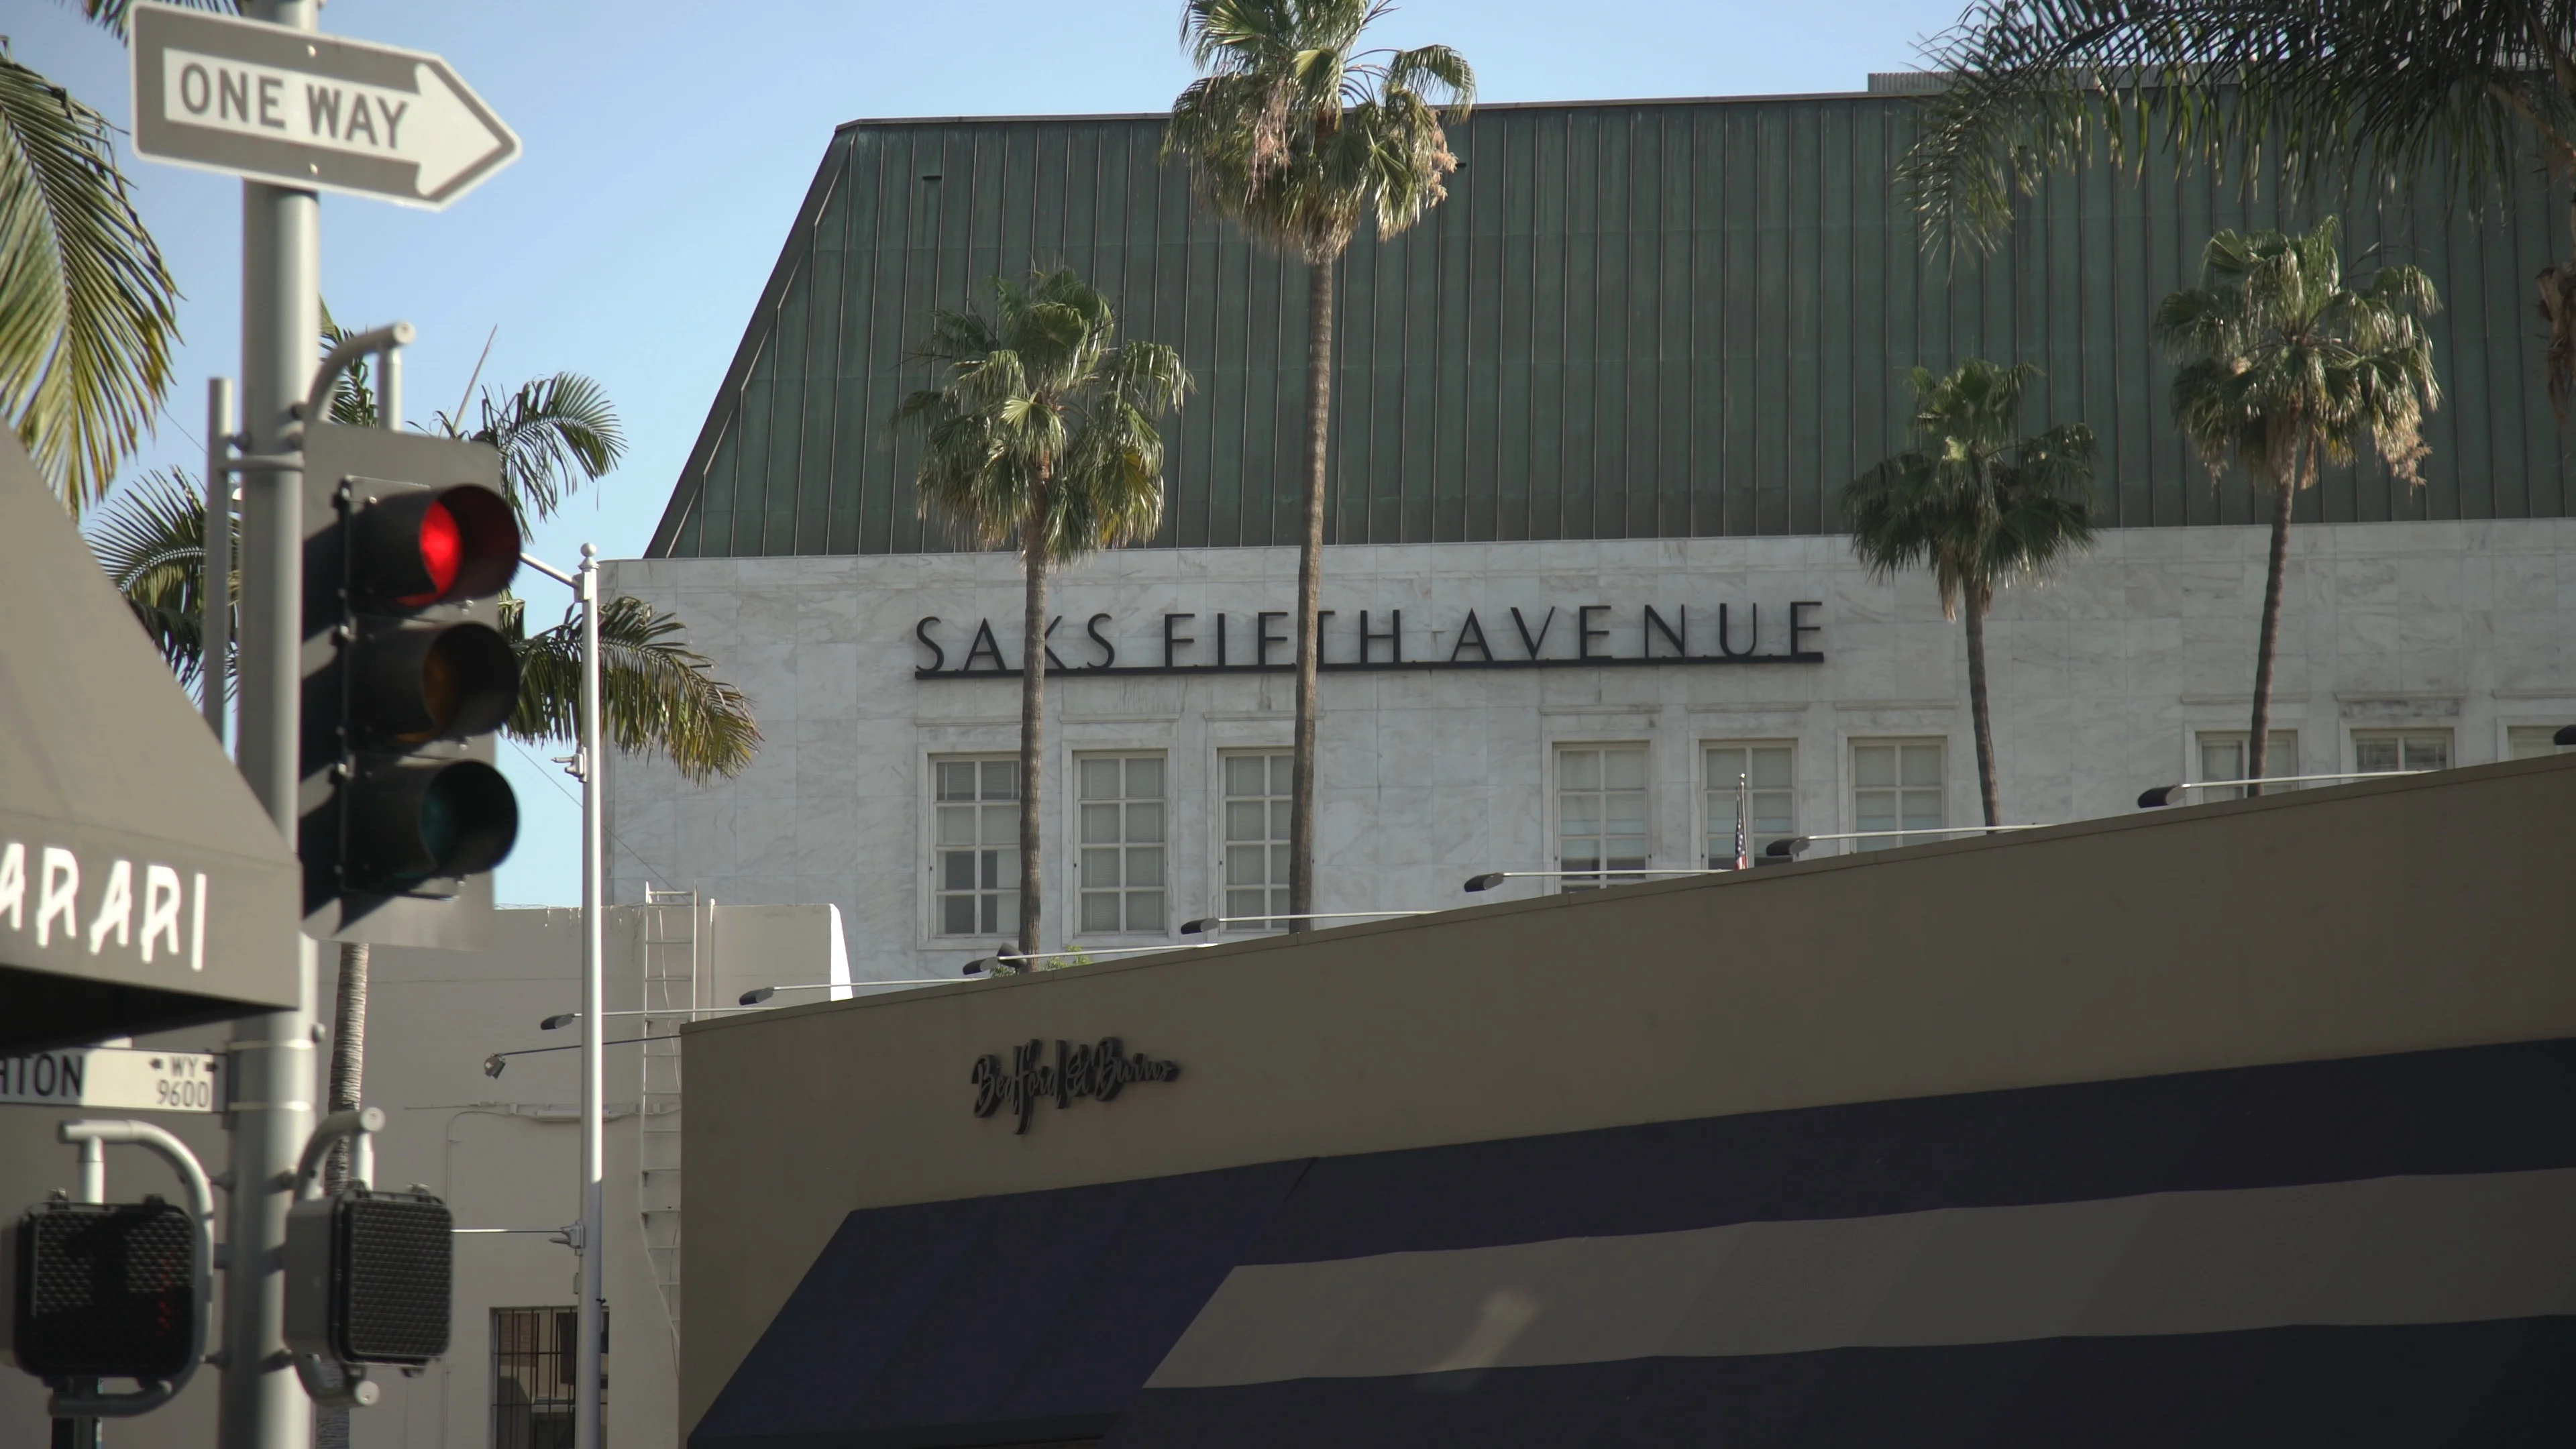 Saks Fifth Avenue  Shopping in Beverly Hills, Los Angeles